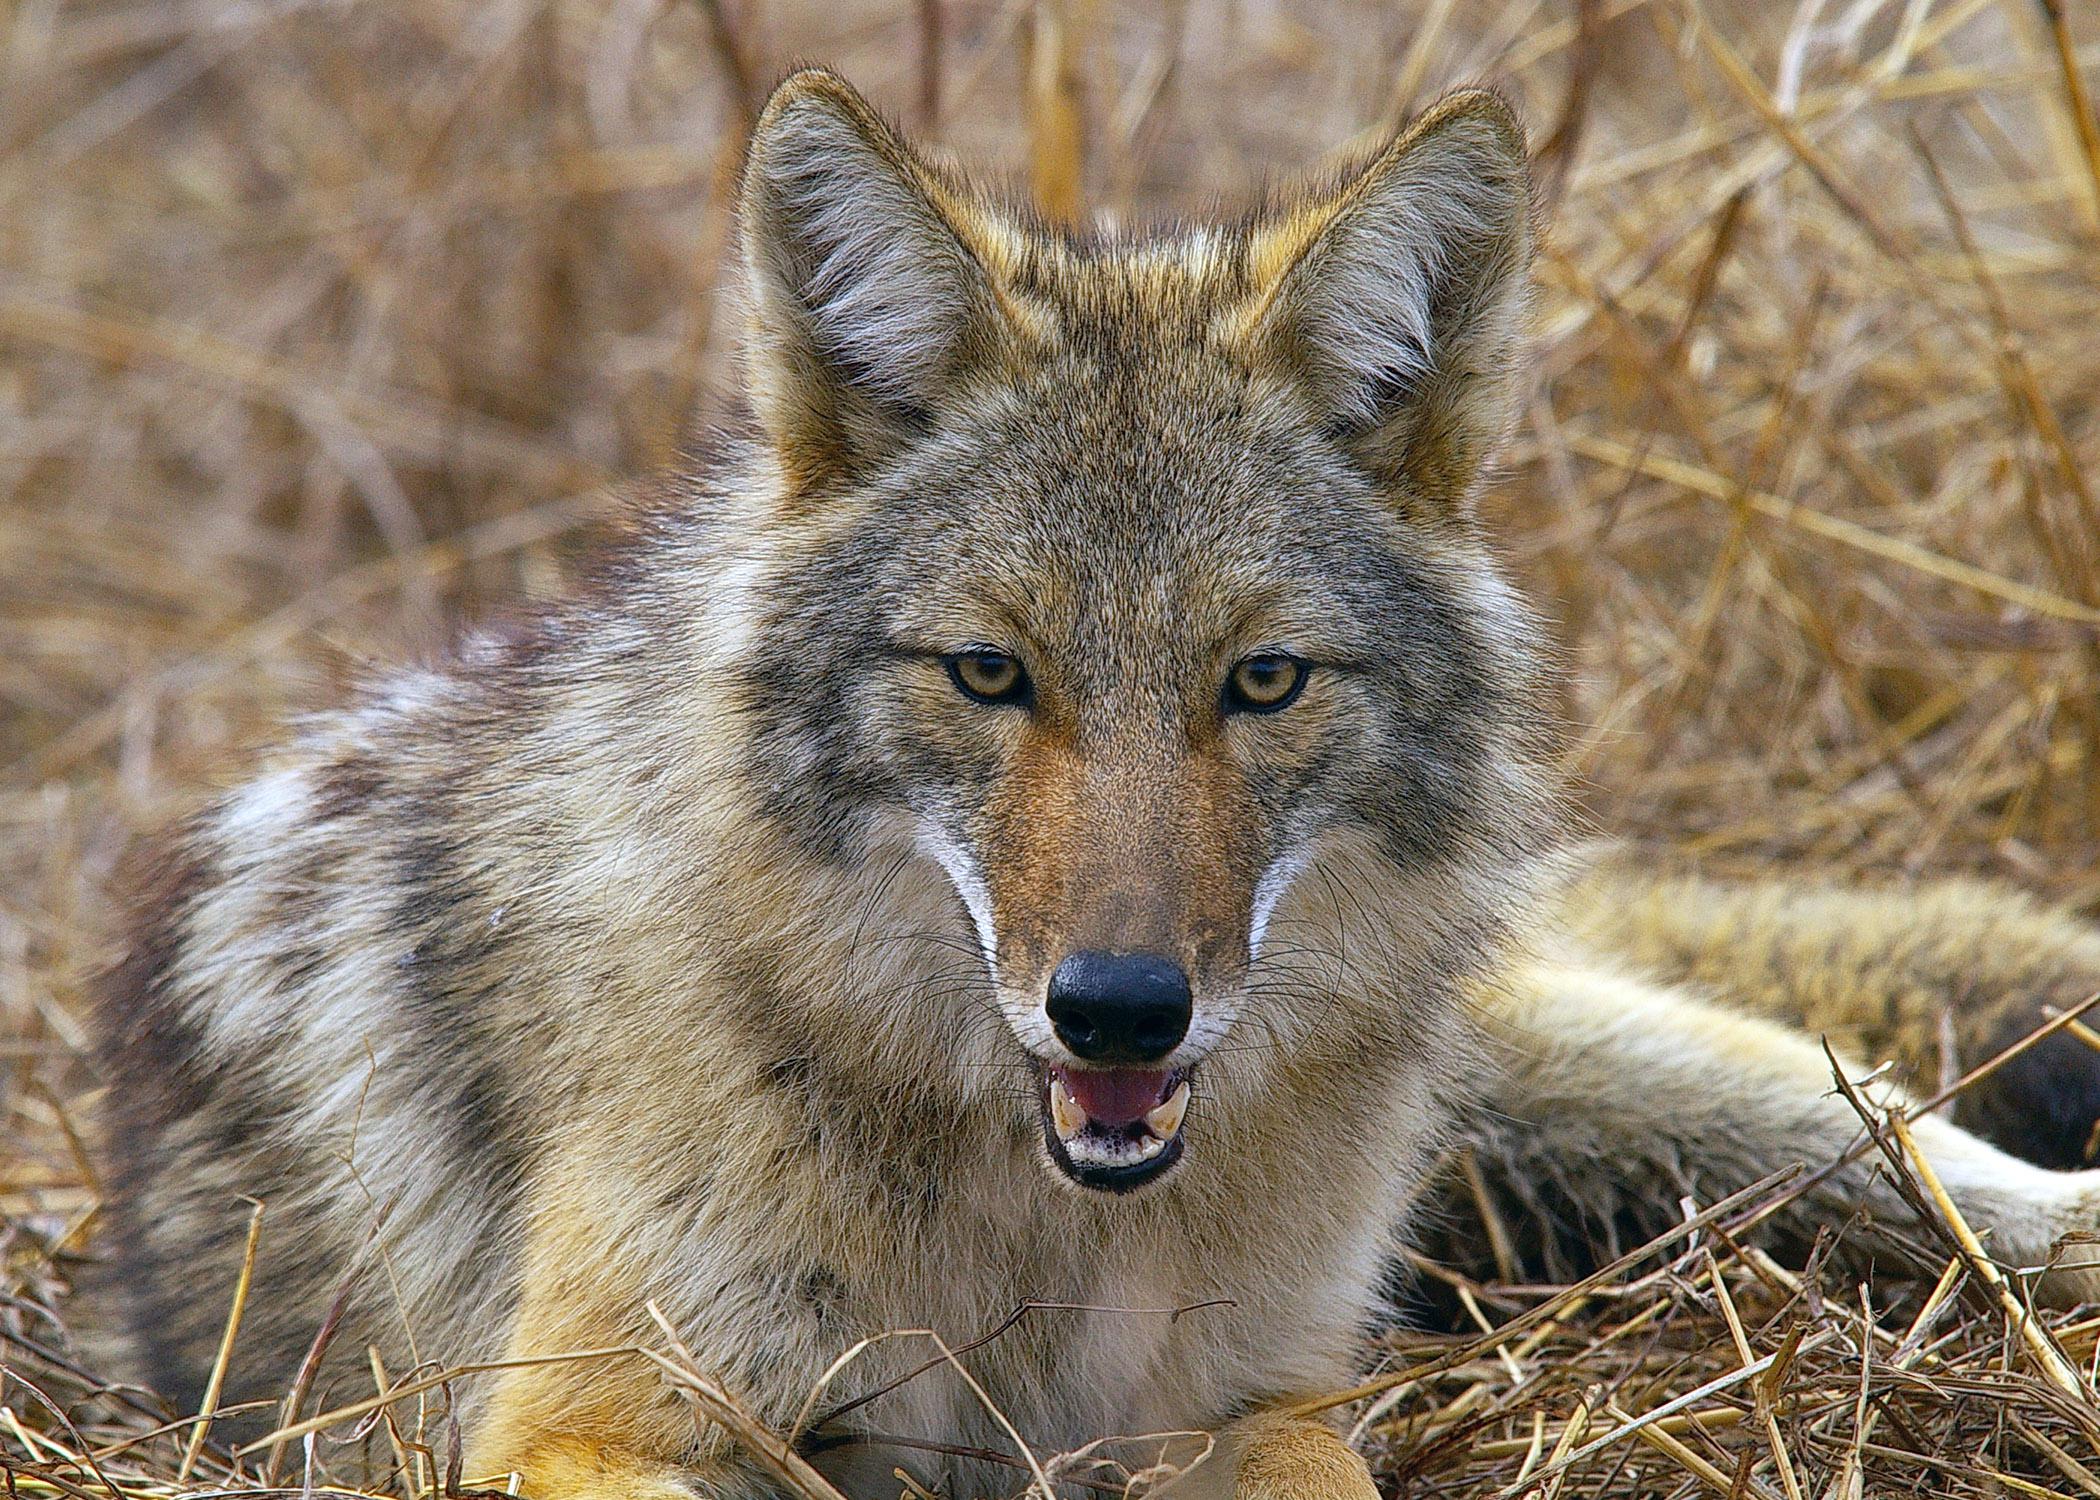 The coyote is an opportunistic hunter in both rural and urban areas. It looks like a medium-sized collie or German shepherd. (Photo courtesy of Eric Wengert)